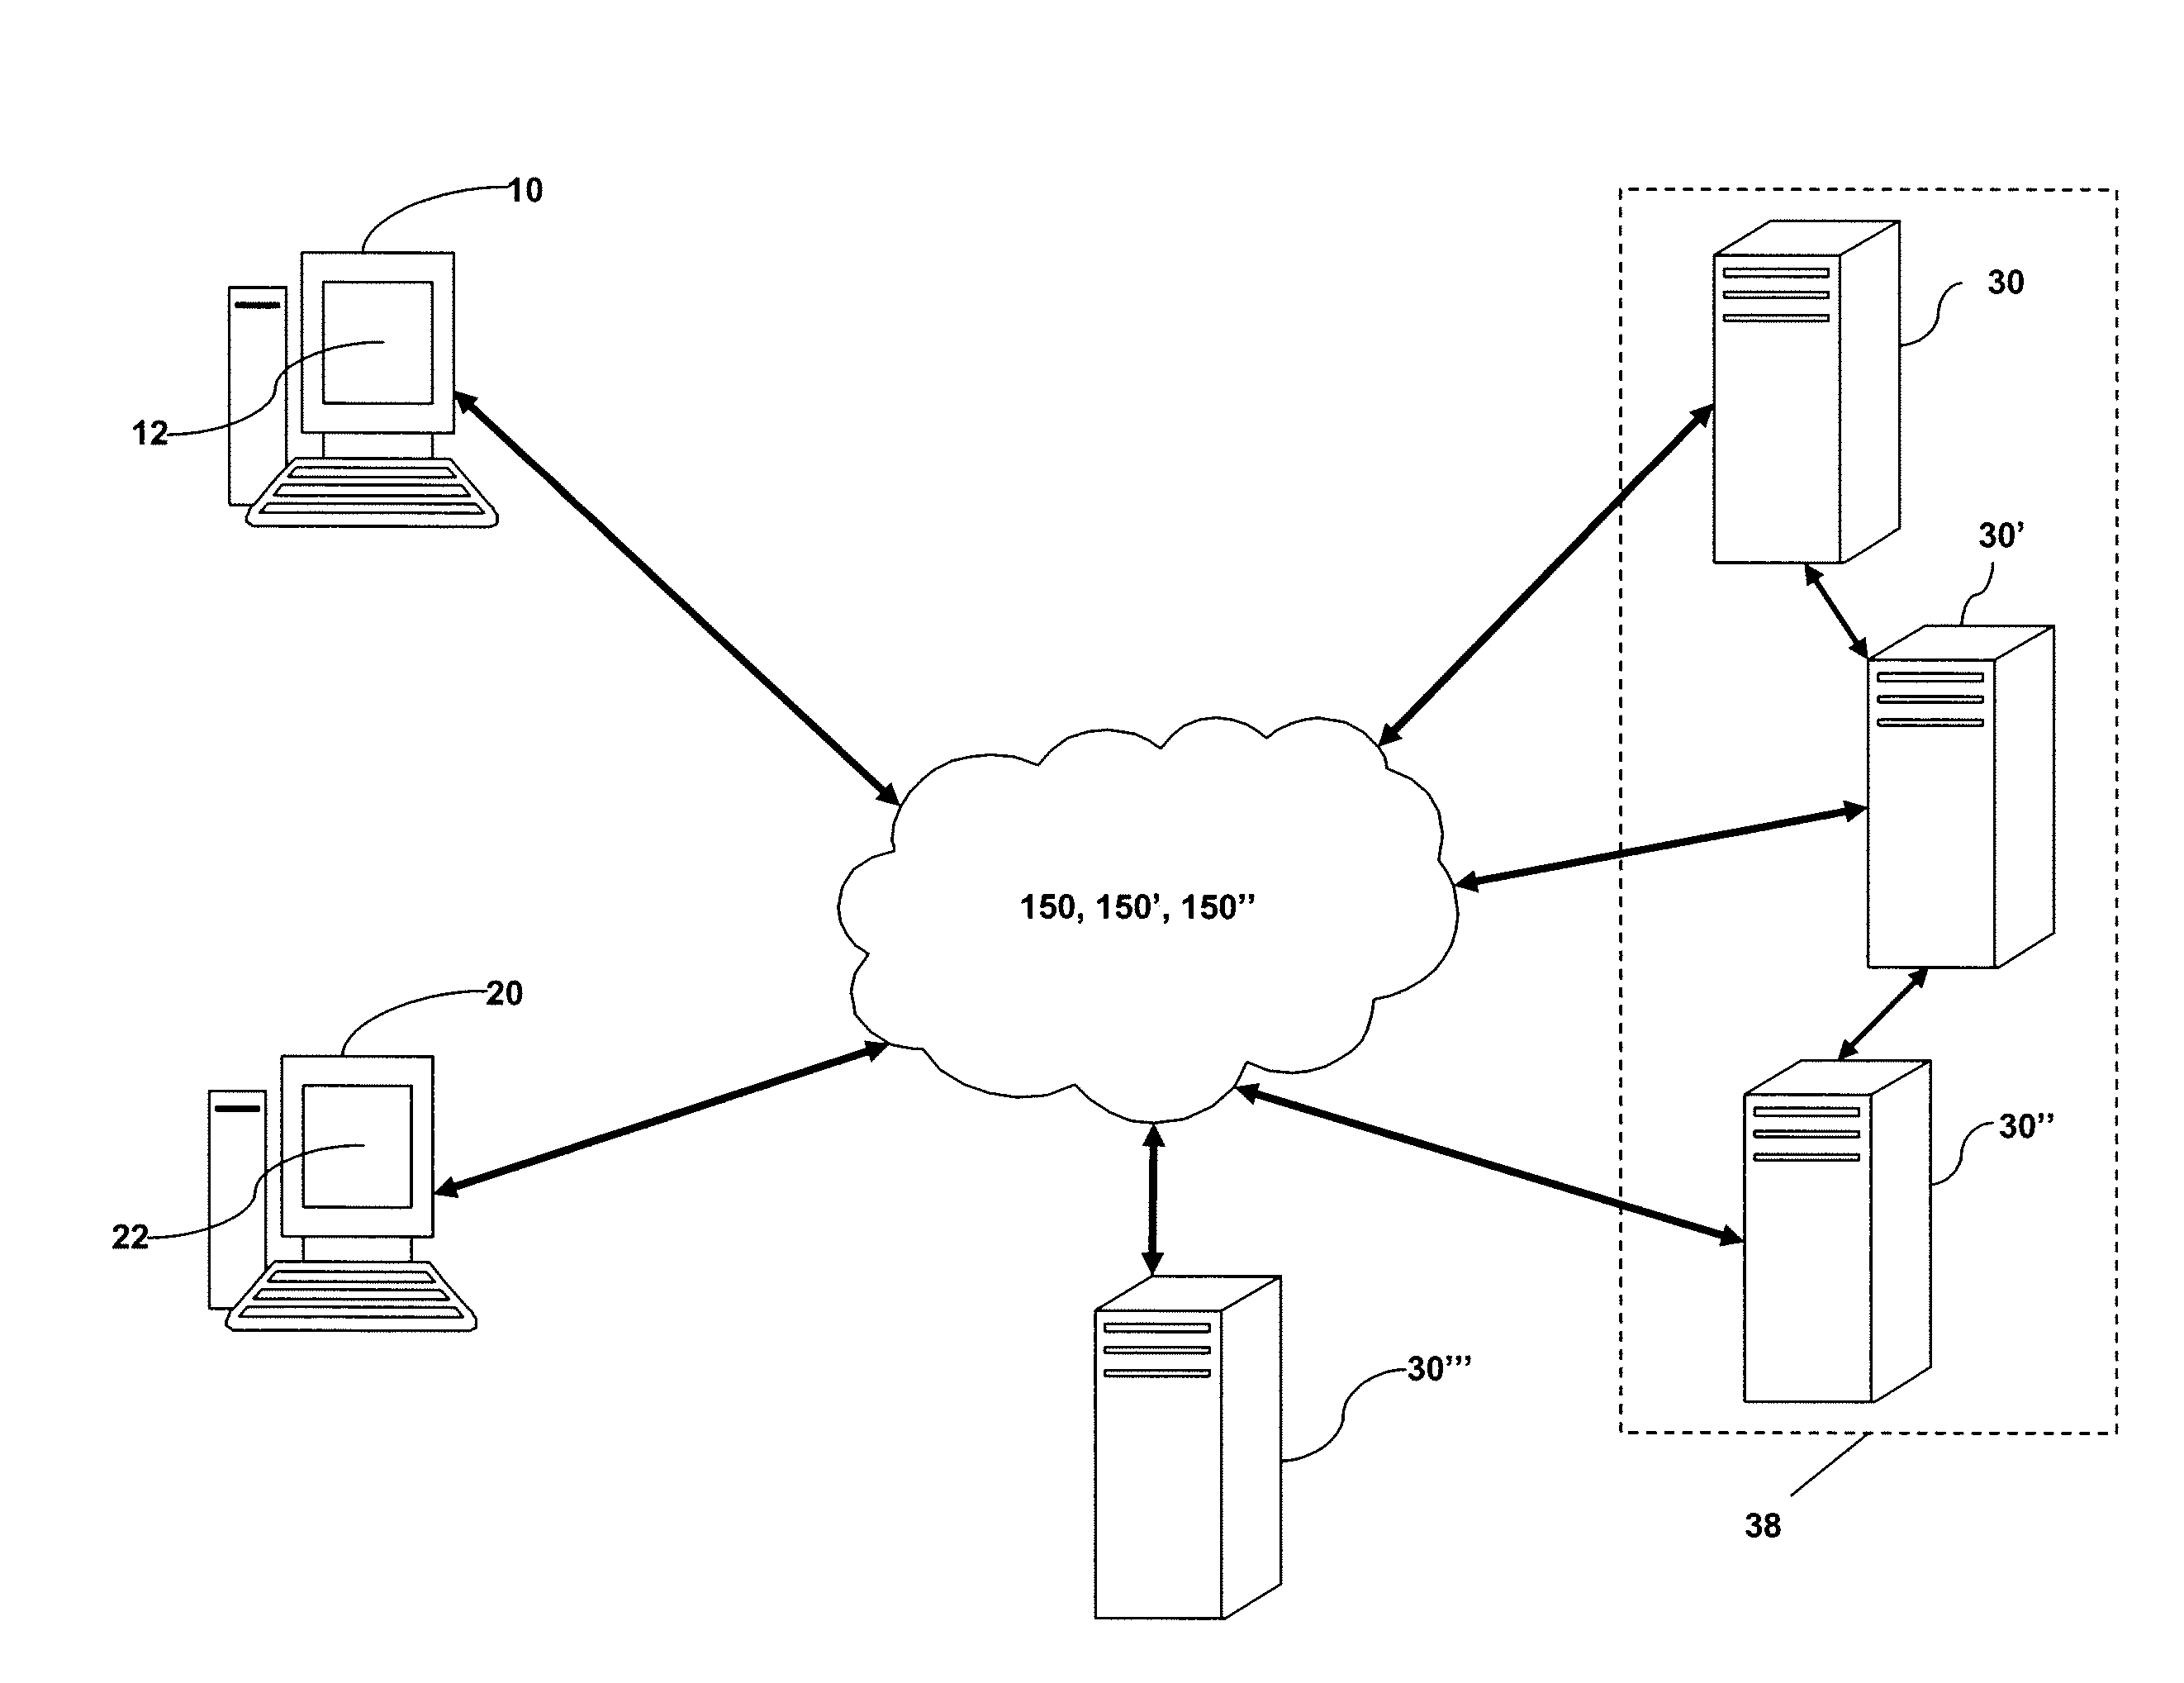 Systems and methods for service isolation